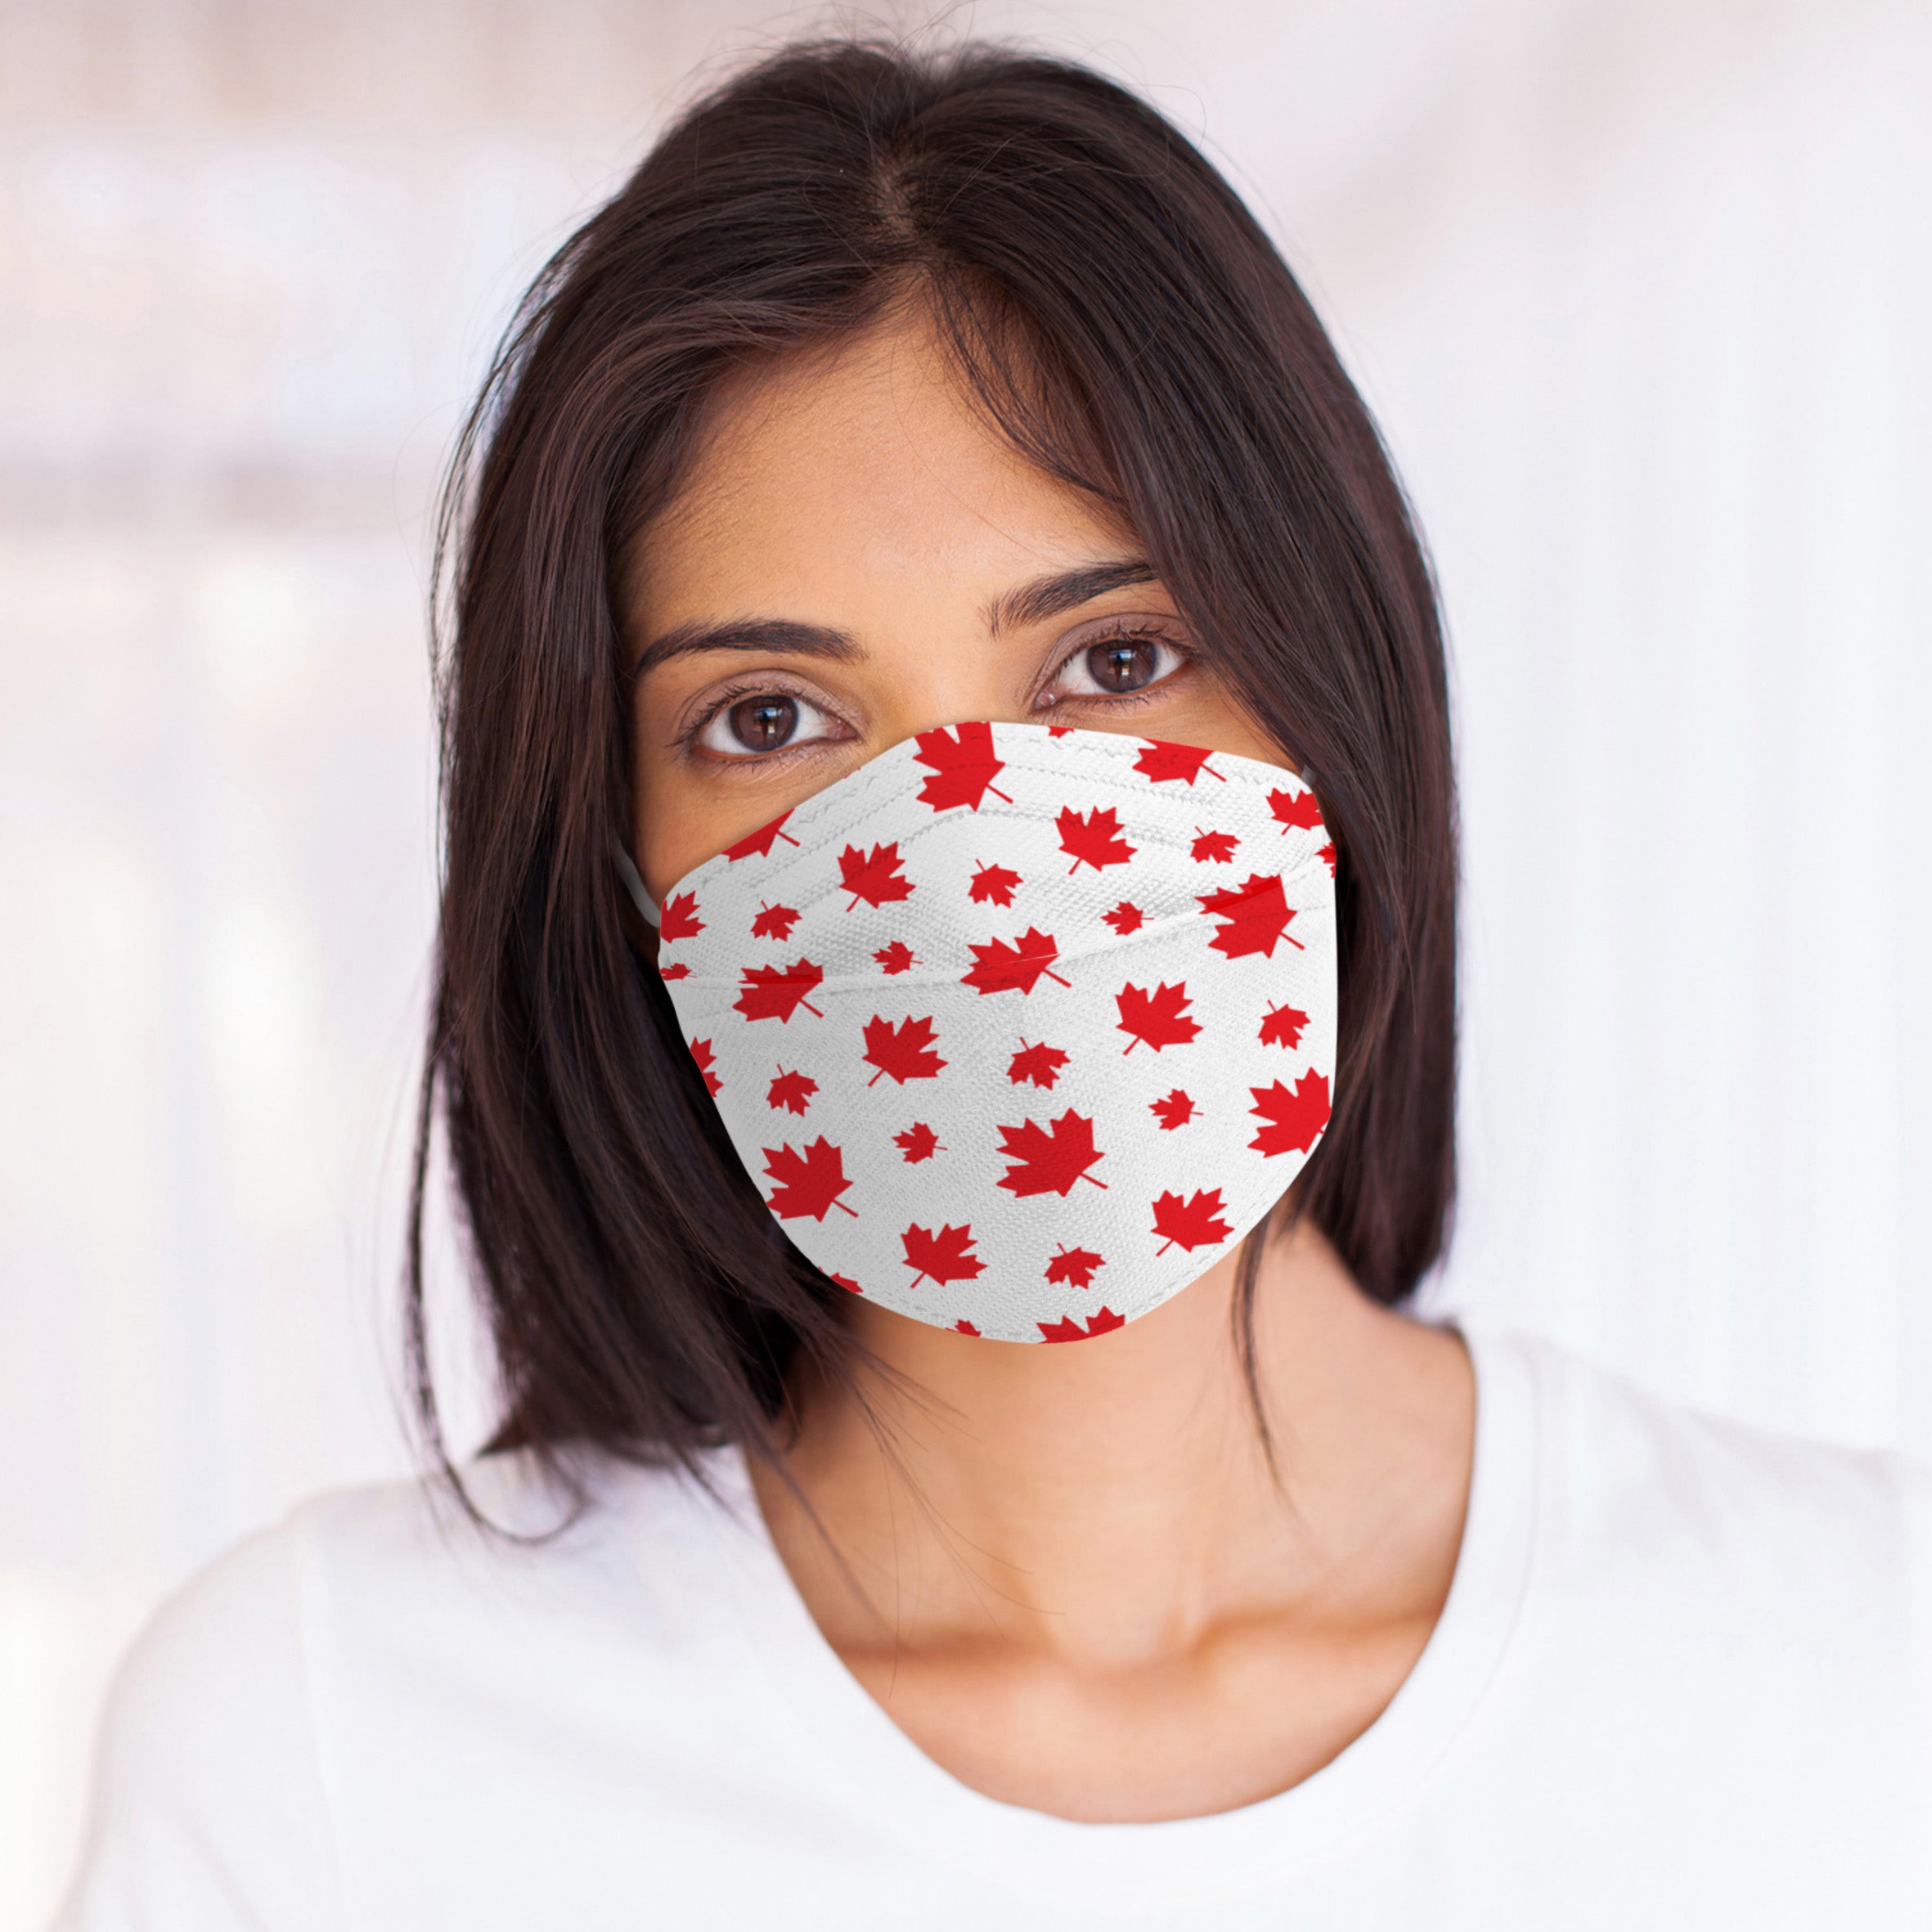 BreatheTeq Limited Edition Maple Leaf Face Mask - Made in Canada